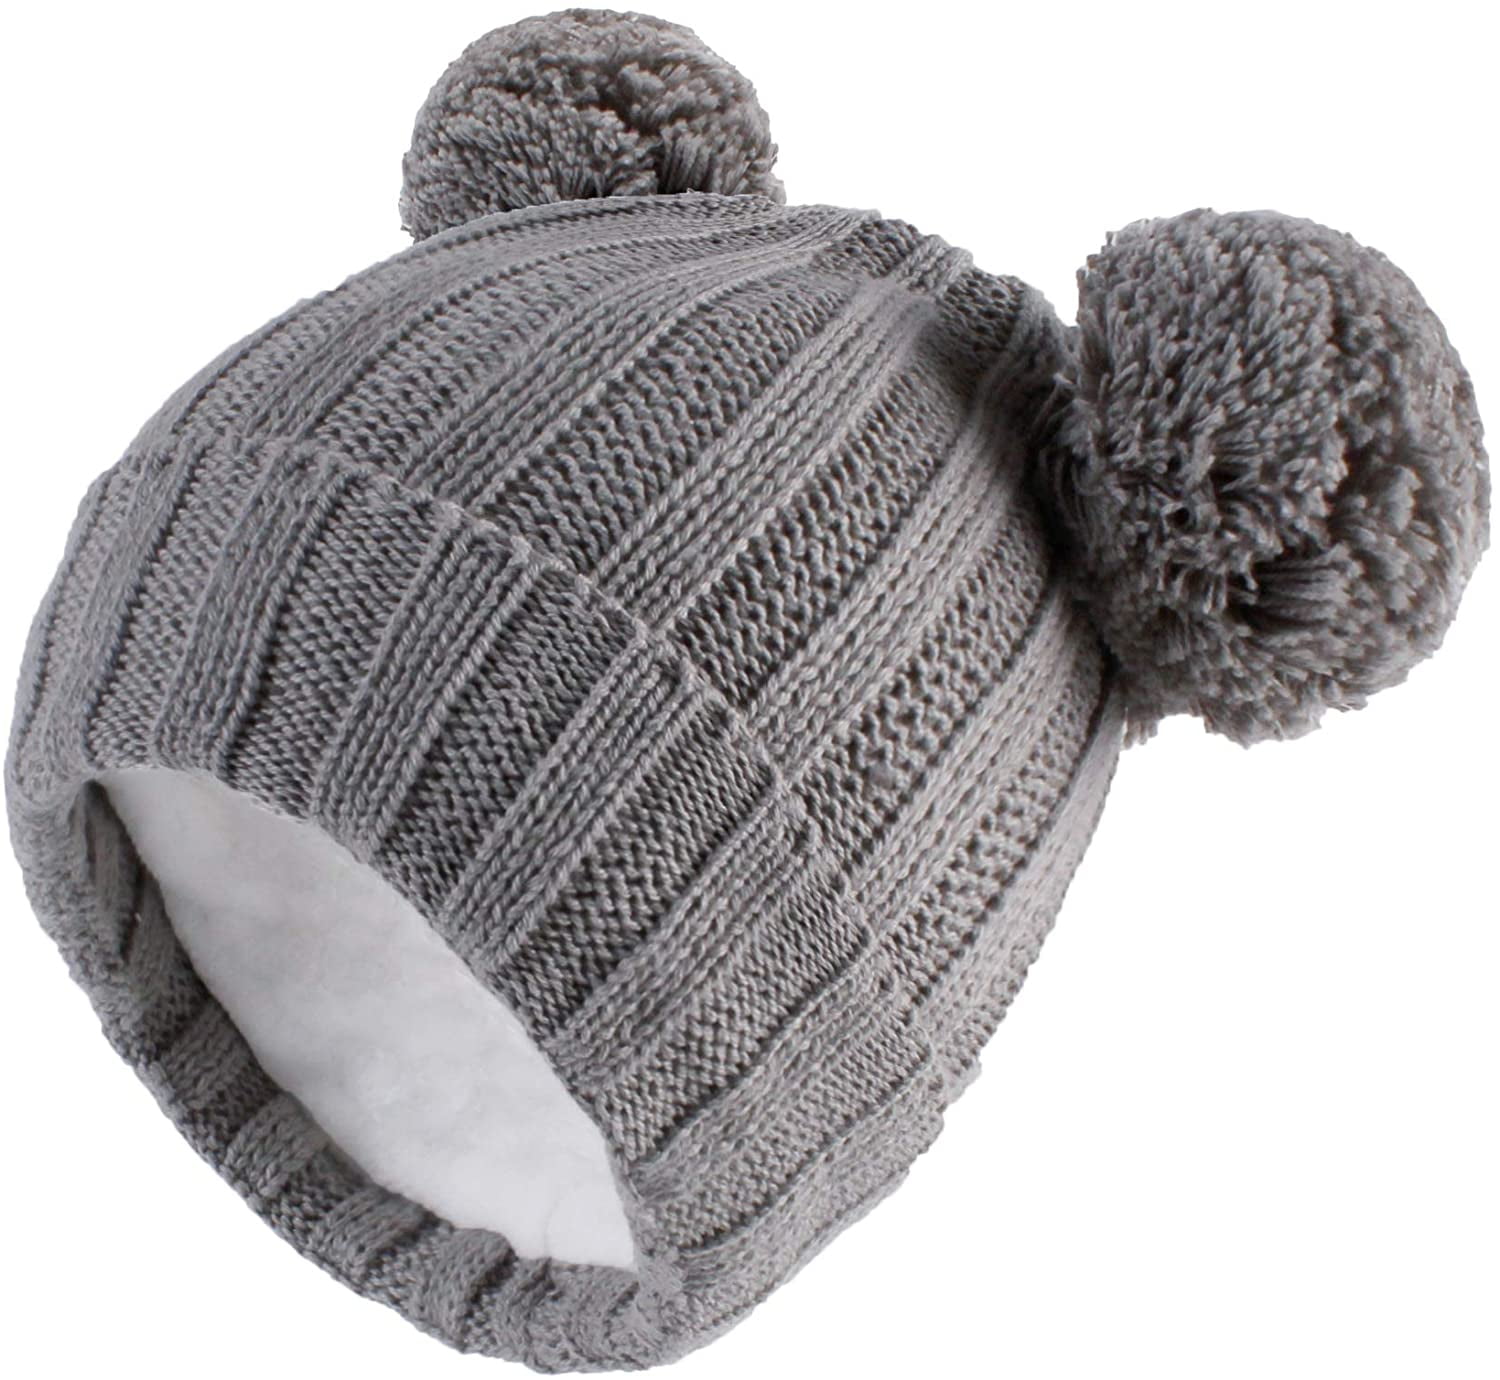 LANGZHEN Winter Warm Knitted Baby Hats for Girls Pom Pom Kid Toddler Boys Beanies Cap with Fleece Lining 